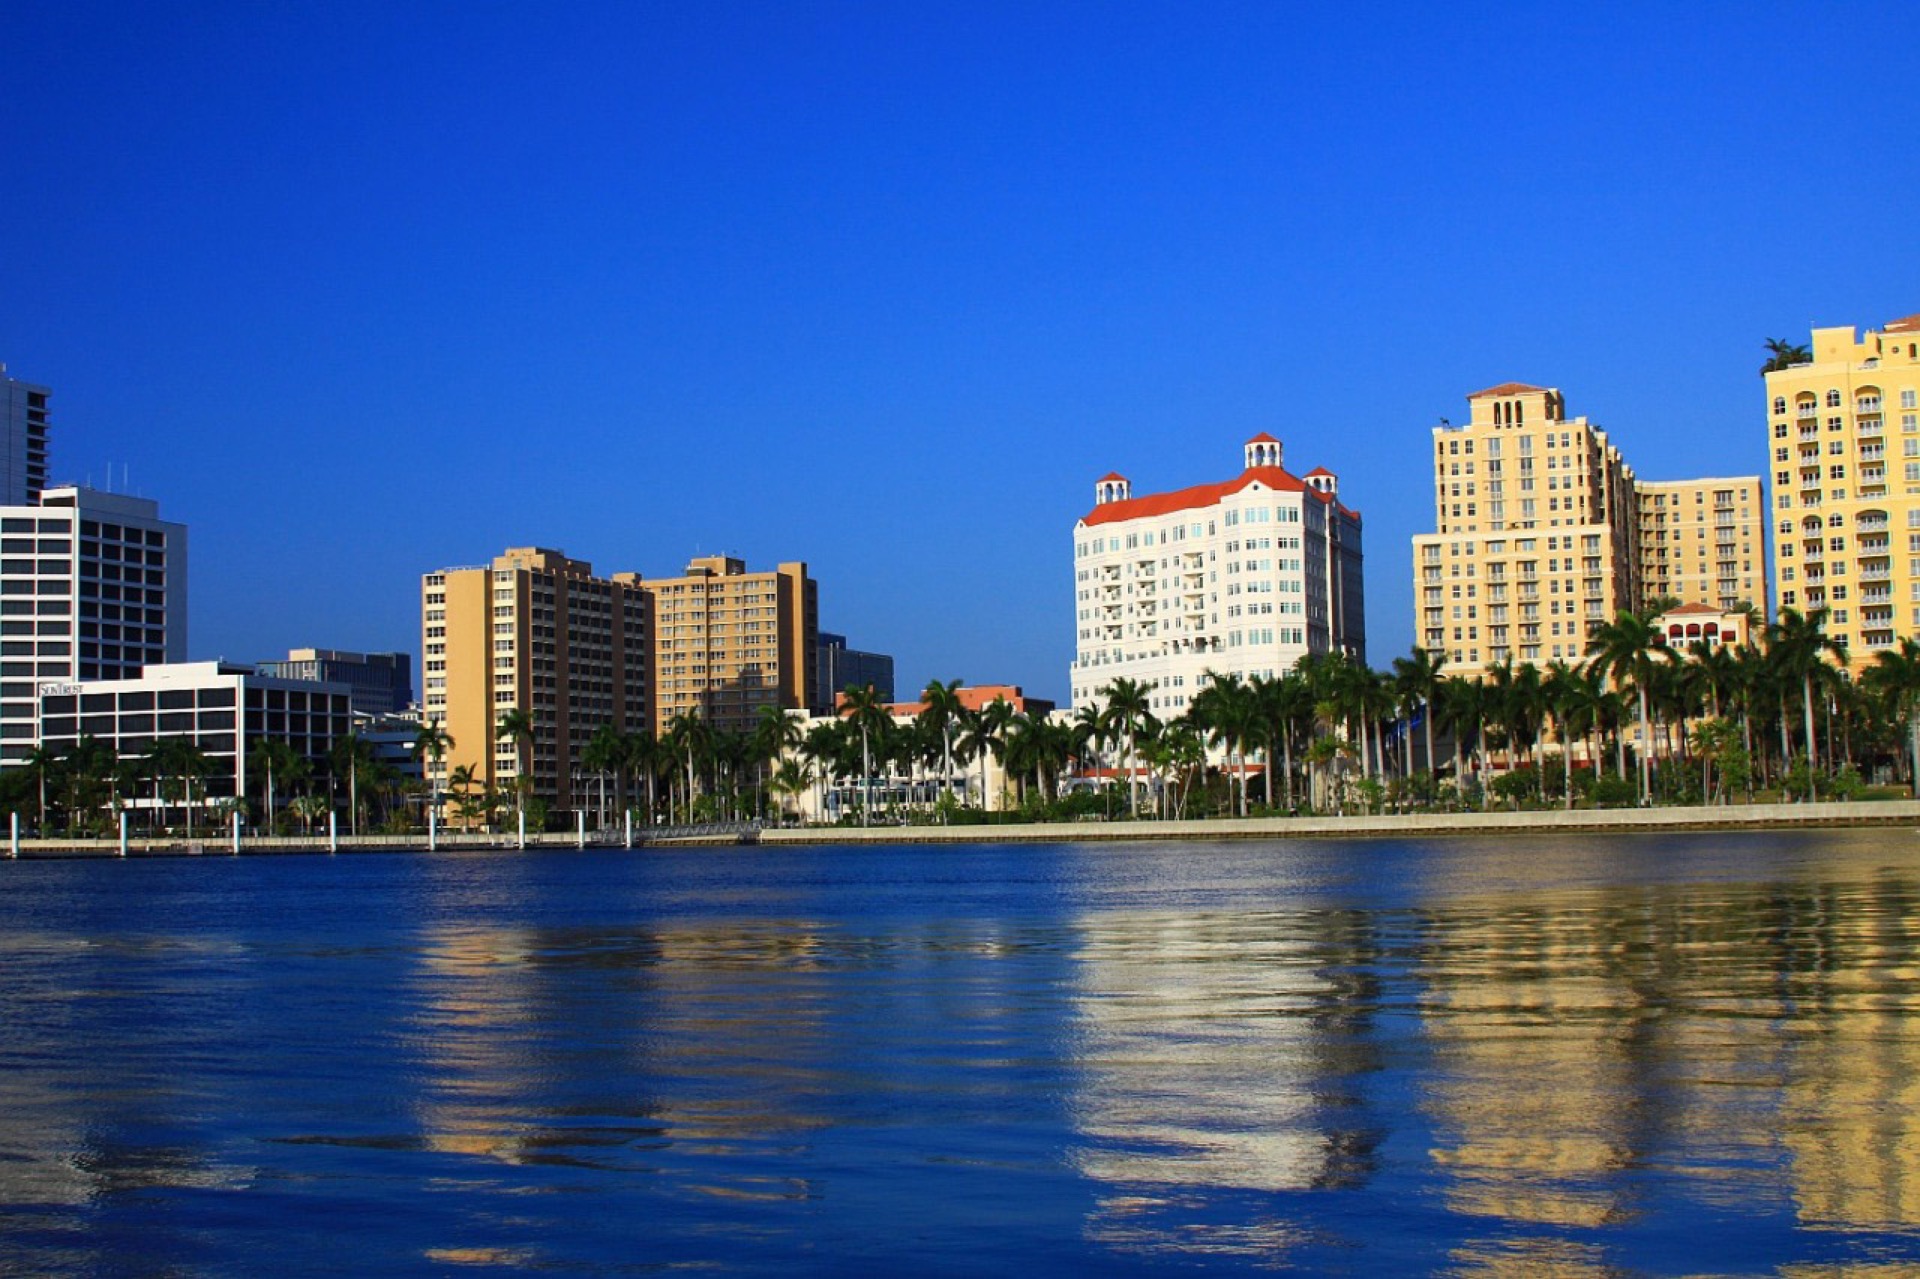 22 Condos for Sale in West Palm Beach - Can You Handle Condominium Living? 